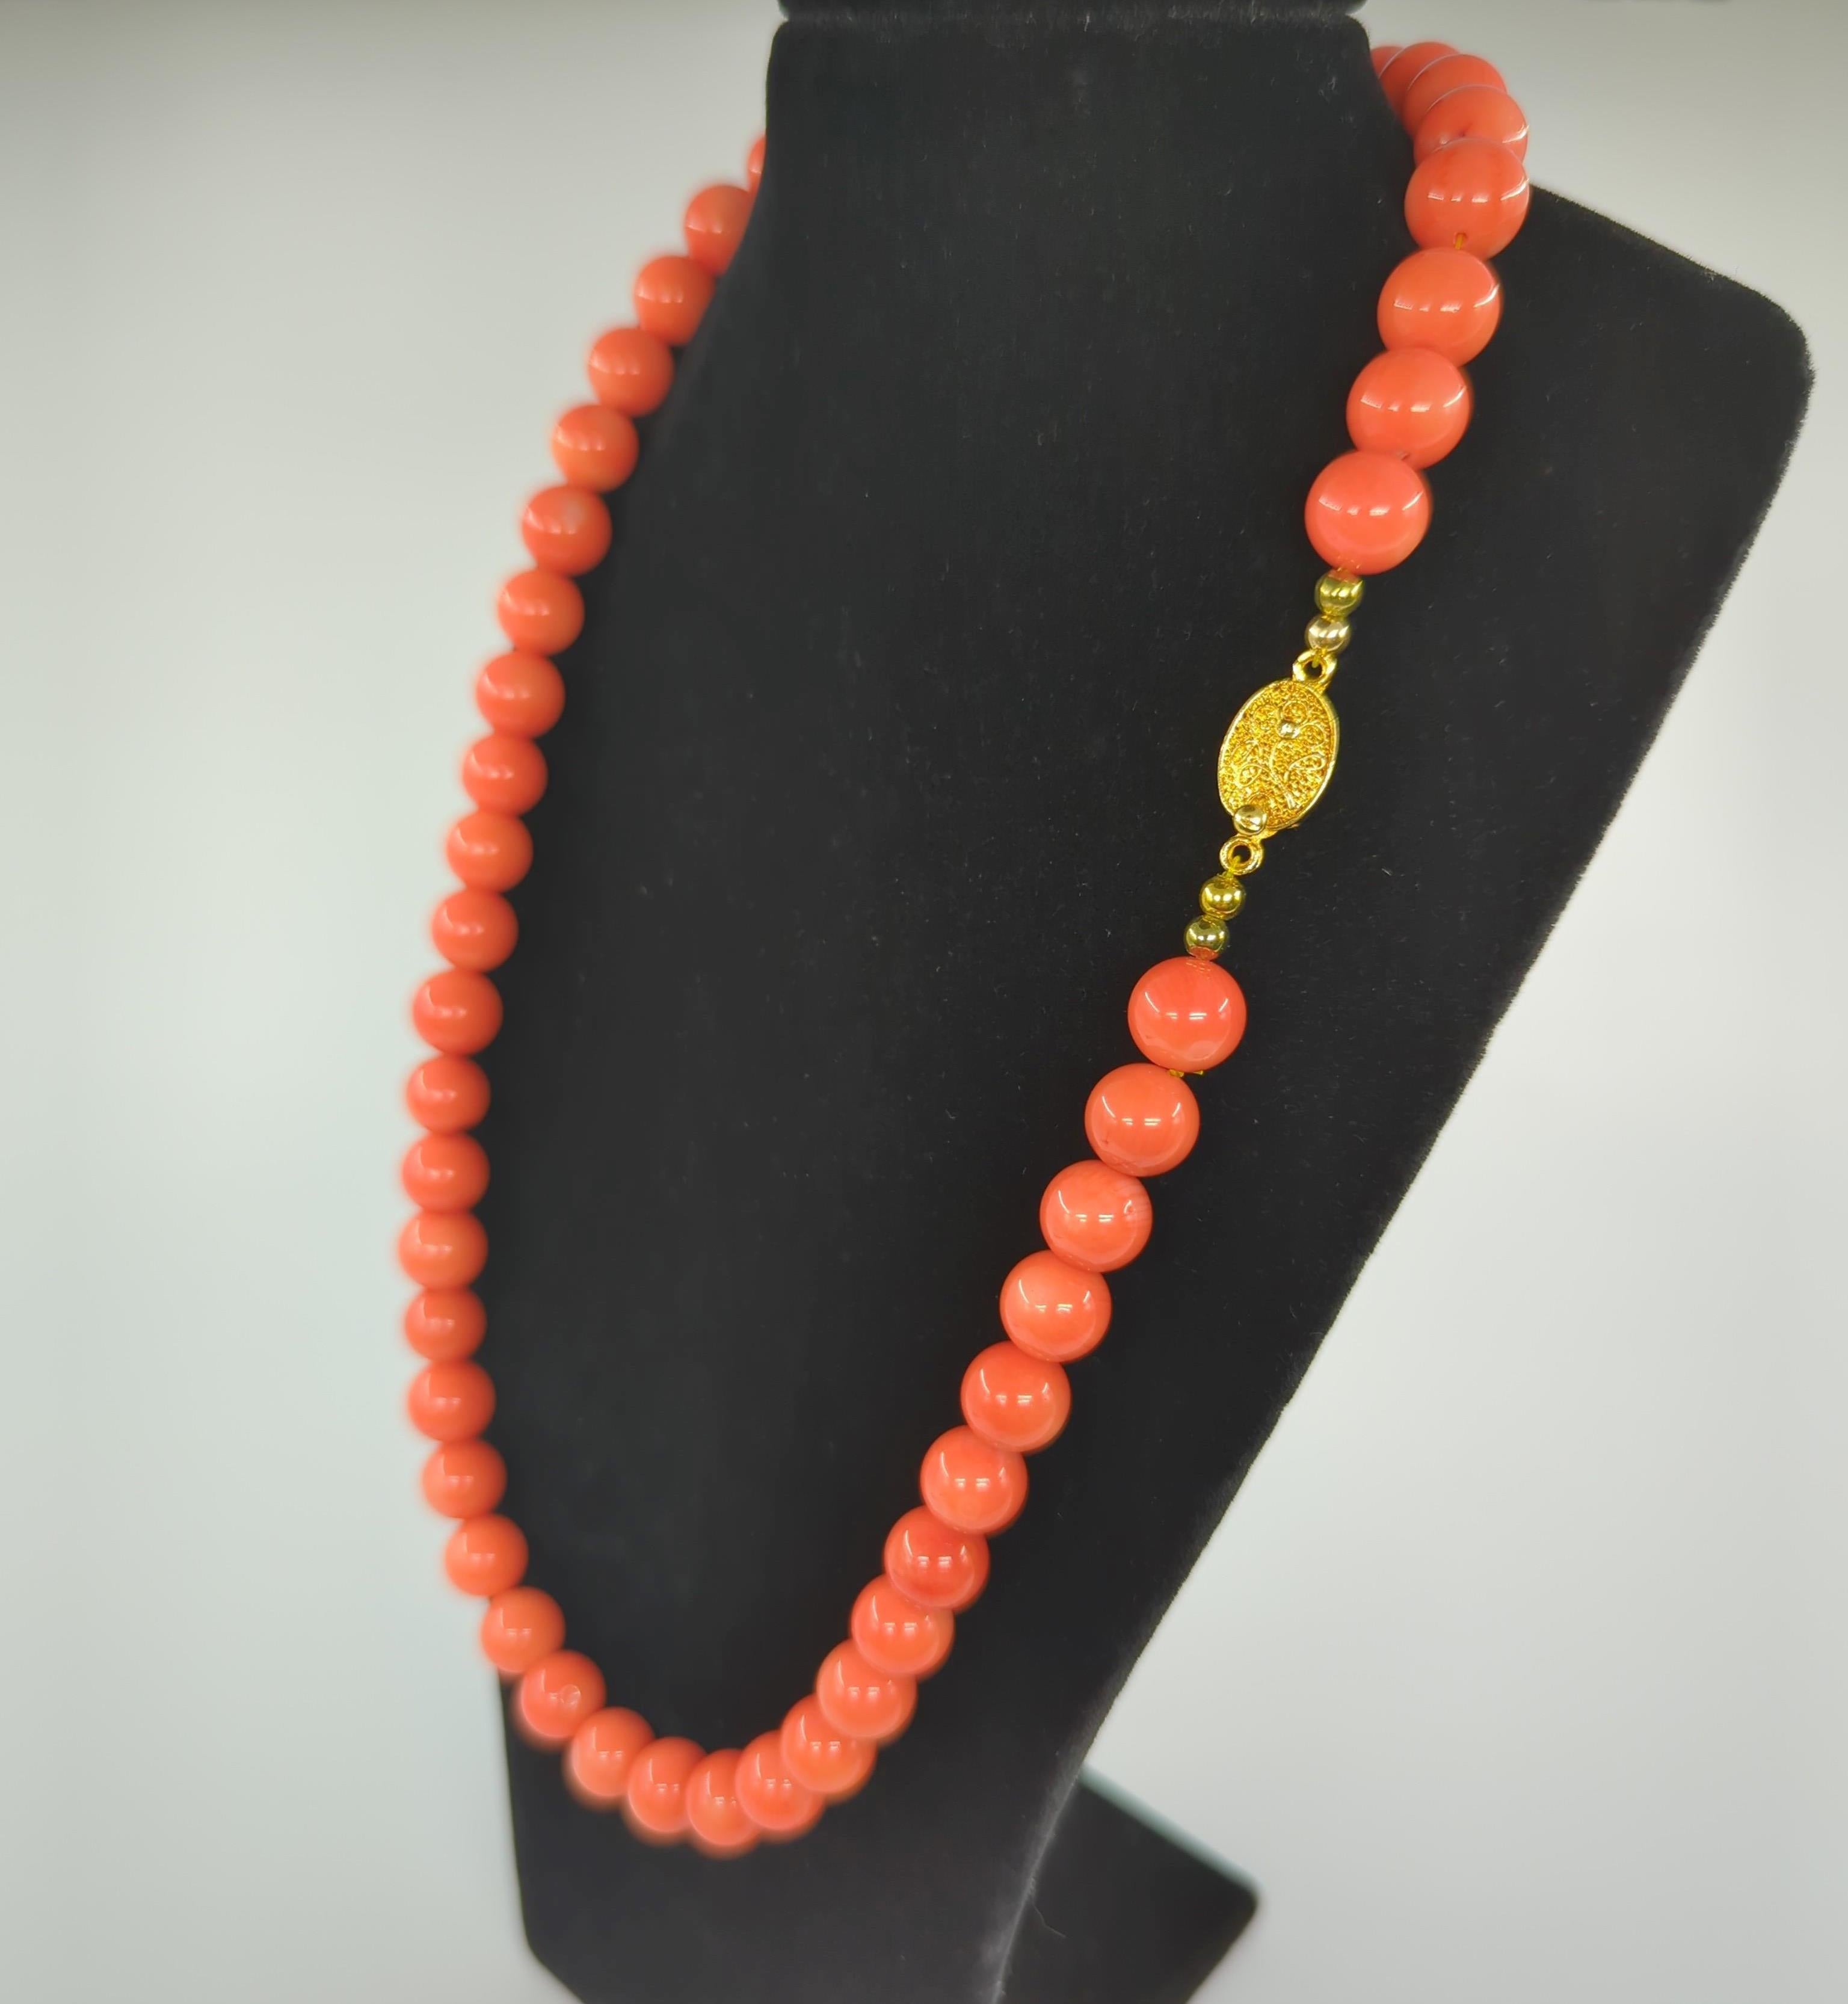 THIS ITEM CAN ONLY BE SHIPPED WITHIN CANADA, please do not purchase if your shipping address is not in Canada. Thanks!

This mid-century single strand coral necklace is a remarkable example of vintage elegance and craftsmanship. The necklace